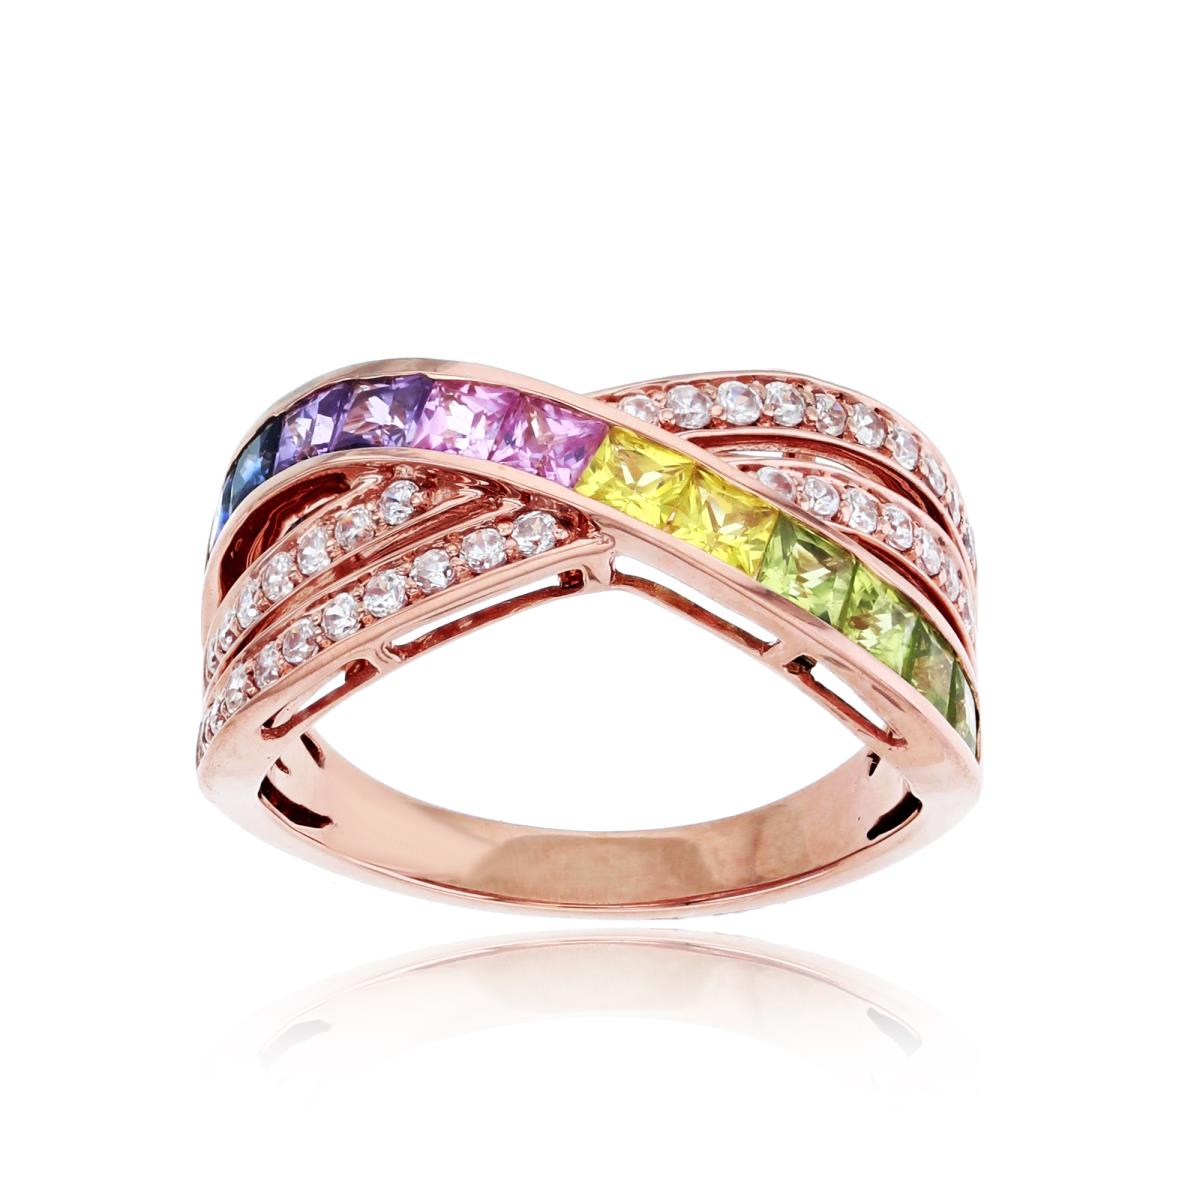 14K Rose Gold 0.34 CTTW RD & 2.5mm SQ Multicolor Criss/Cross Ring (Without backing)